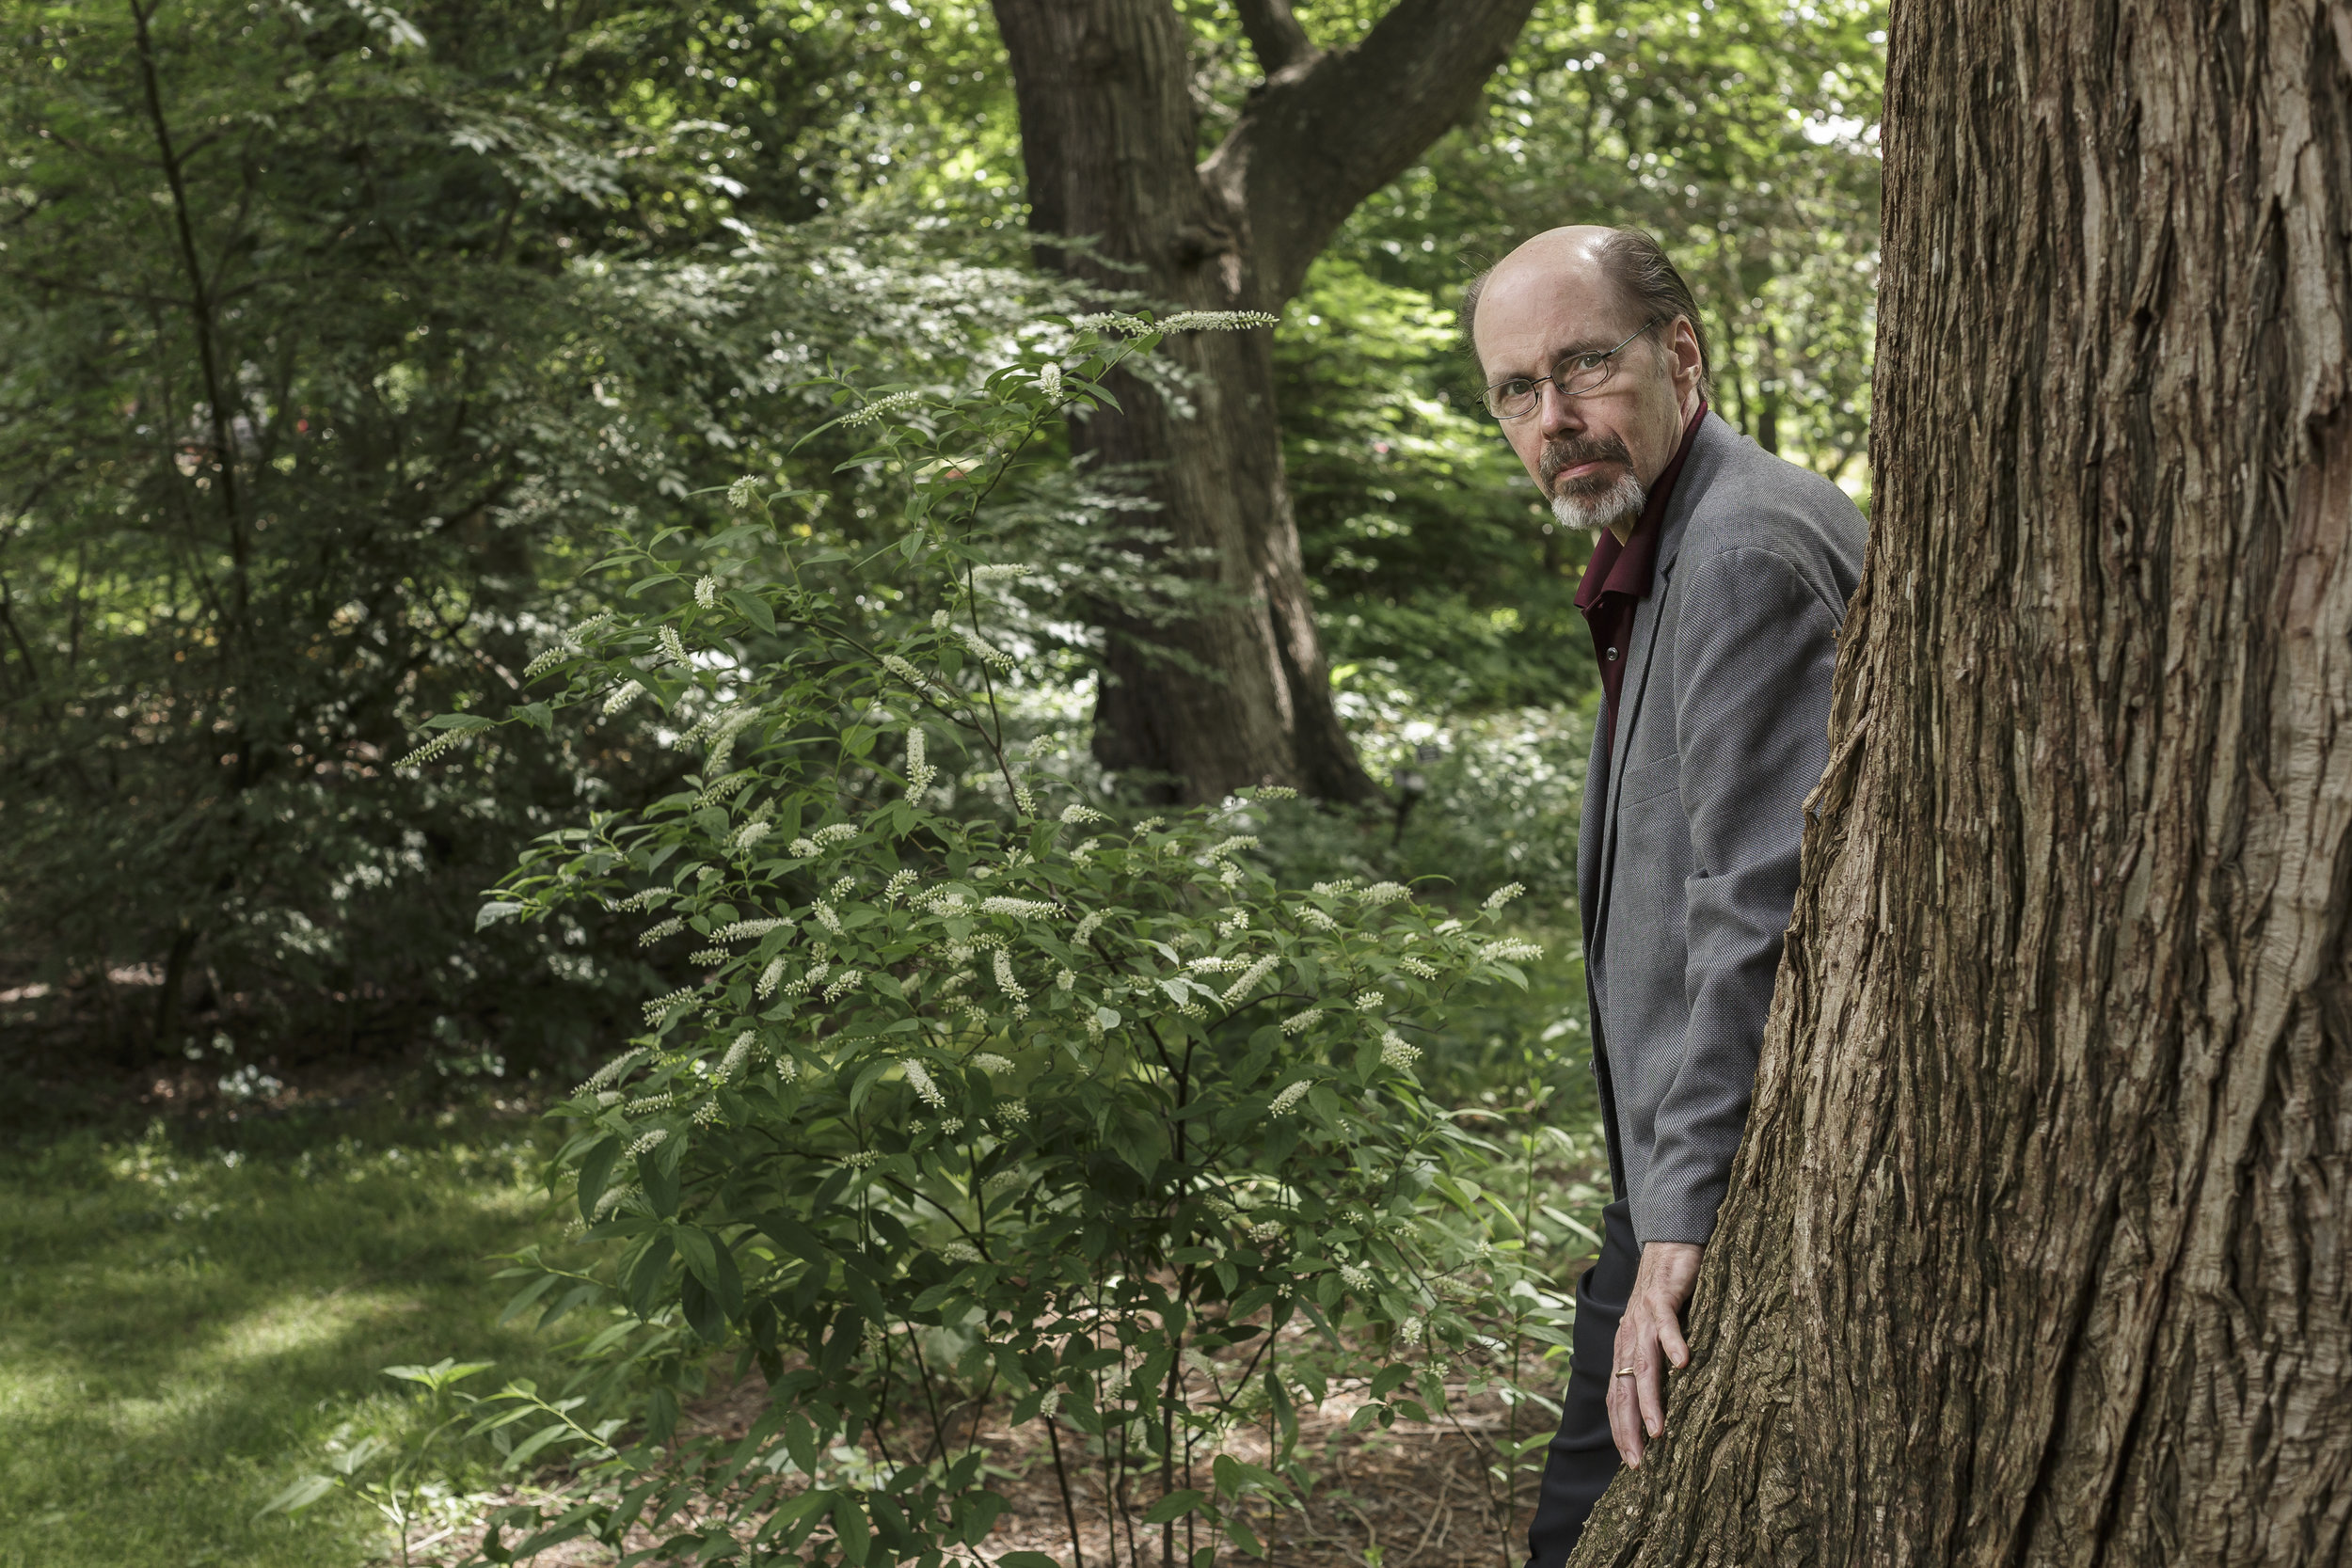  Best-selling murder mystery/crime novelist Jeffery Deaver at Coker Arboretum on the campus of The University of North Carolina at Chapel Hill. For The Financial Times. 